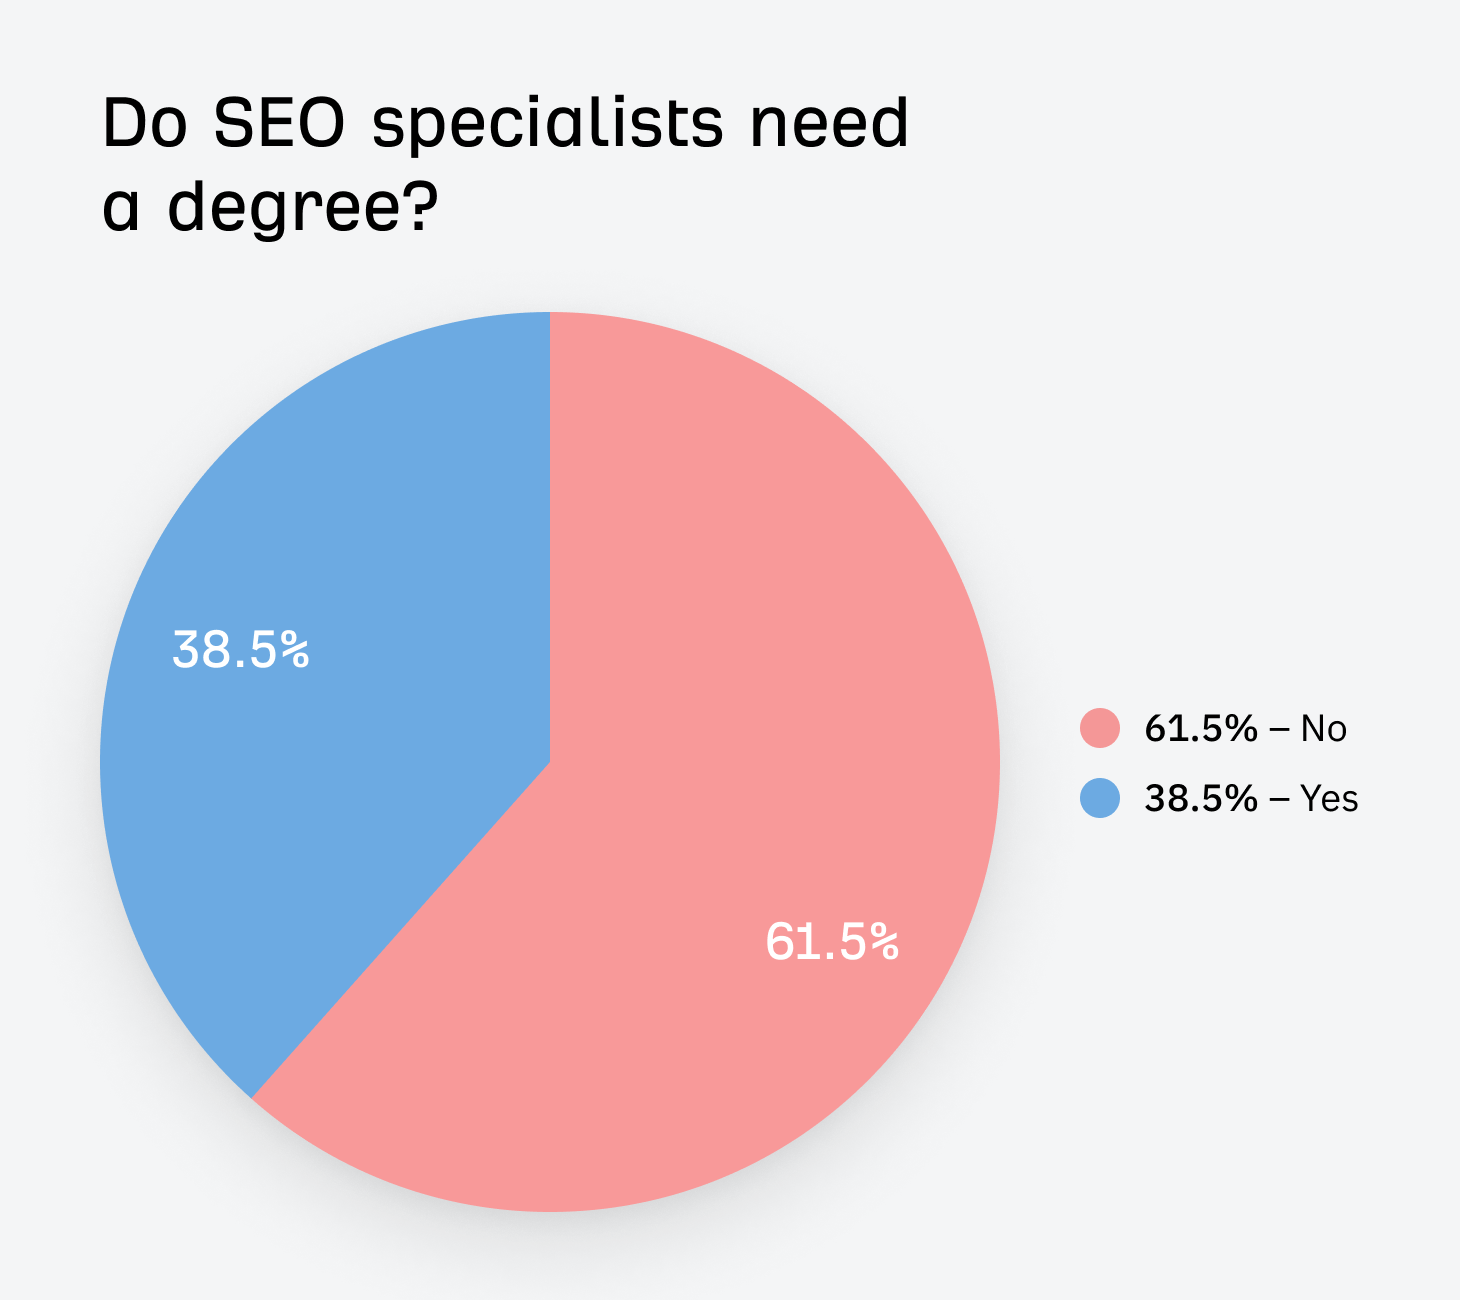 chart-showing-whether-seo-specialists-need-a-degre I Analyzed 52 SEO Specialist Job Listings. Here’s What They Do and How You Can Become One